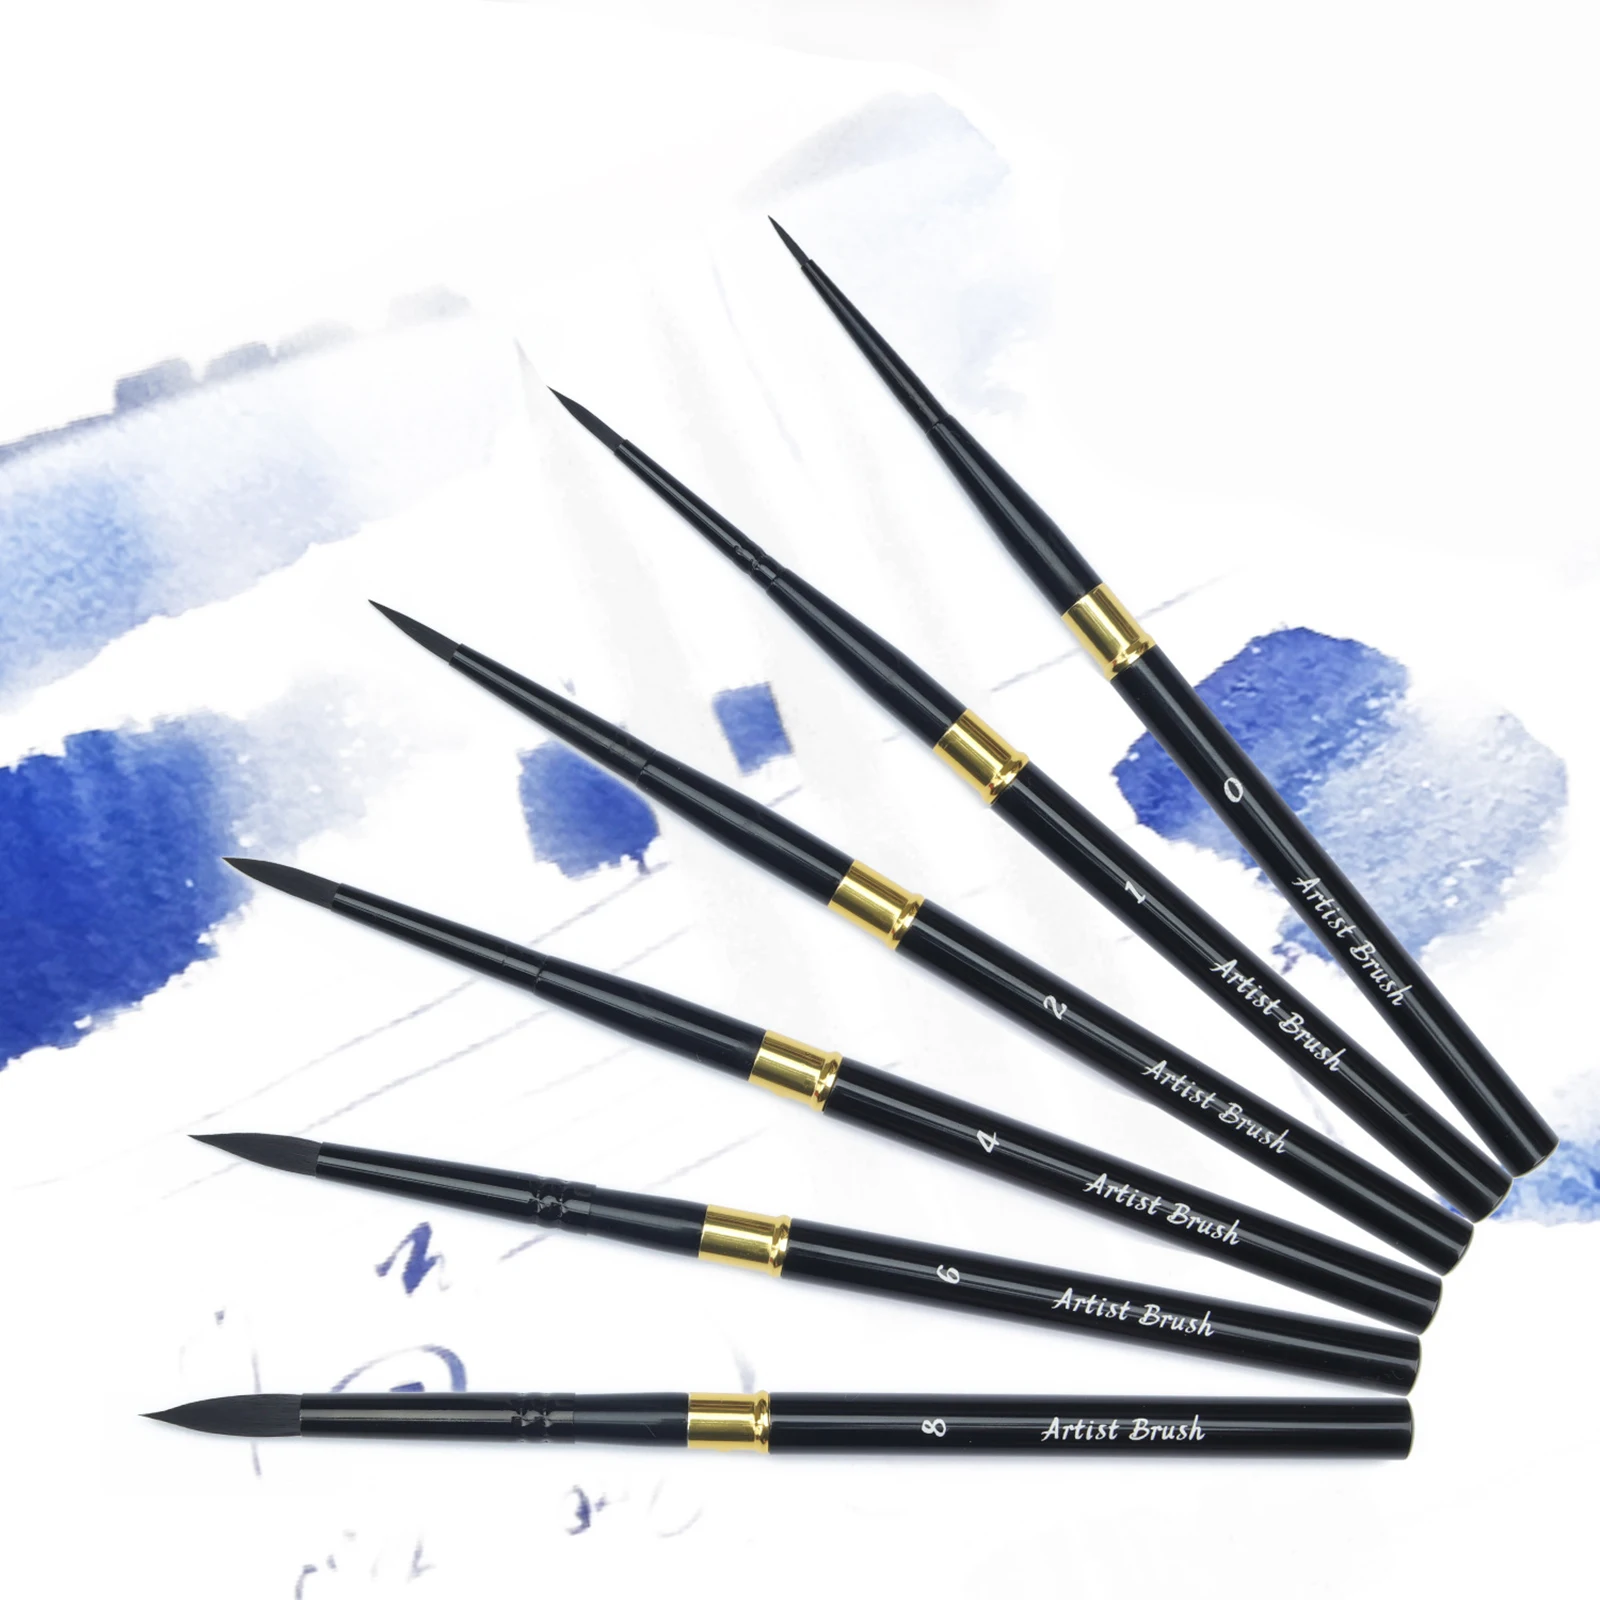 6Pcs Nylon Artist Paint Brushes Set Professional Watercolor Oil Acrylic Painting Brushes Art Painting Supplies Drawing Pen Brush